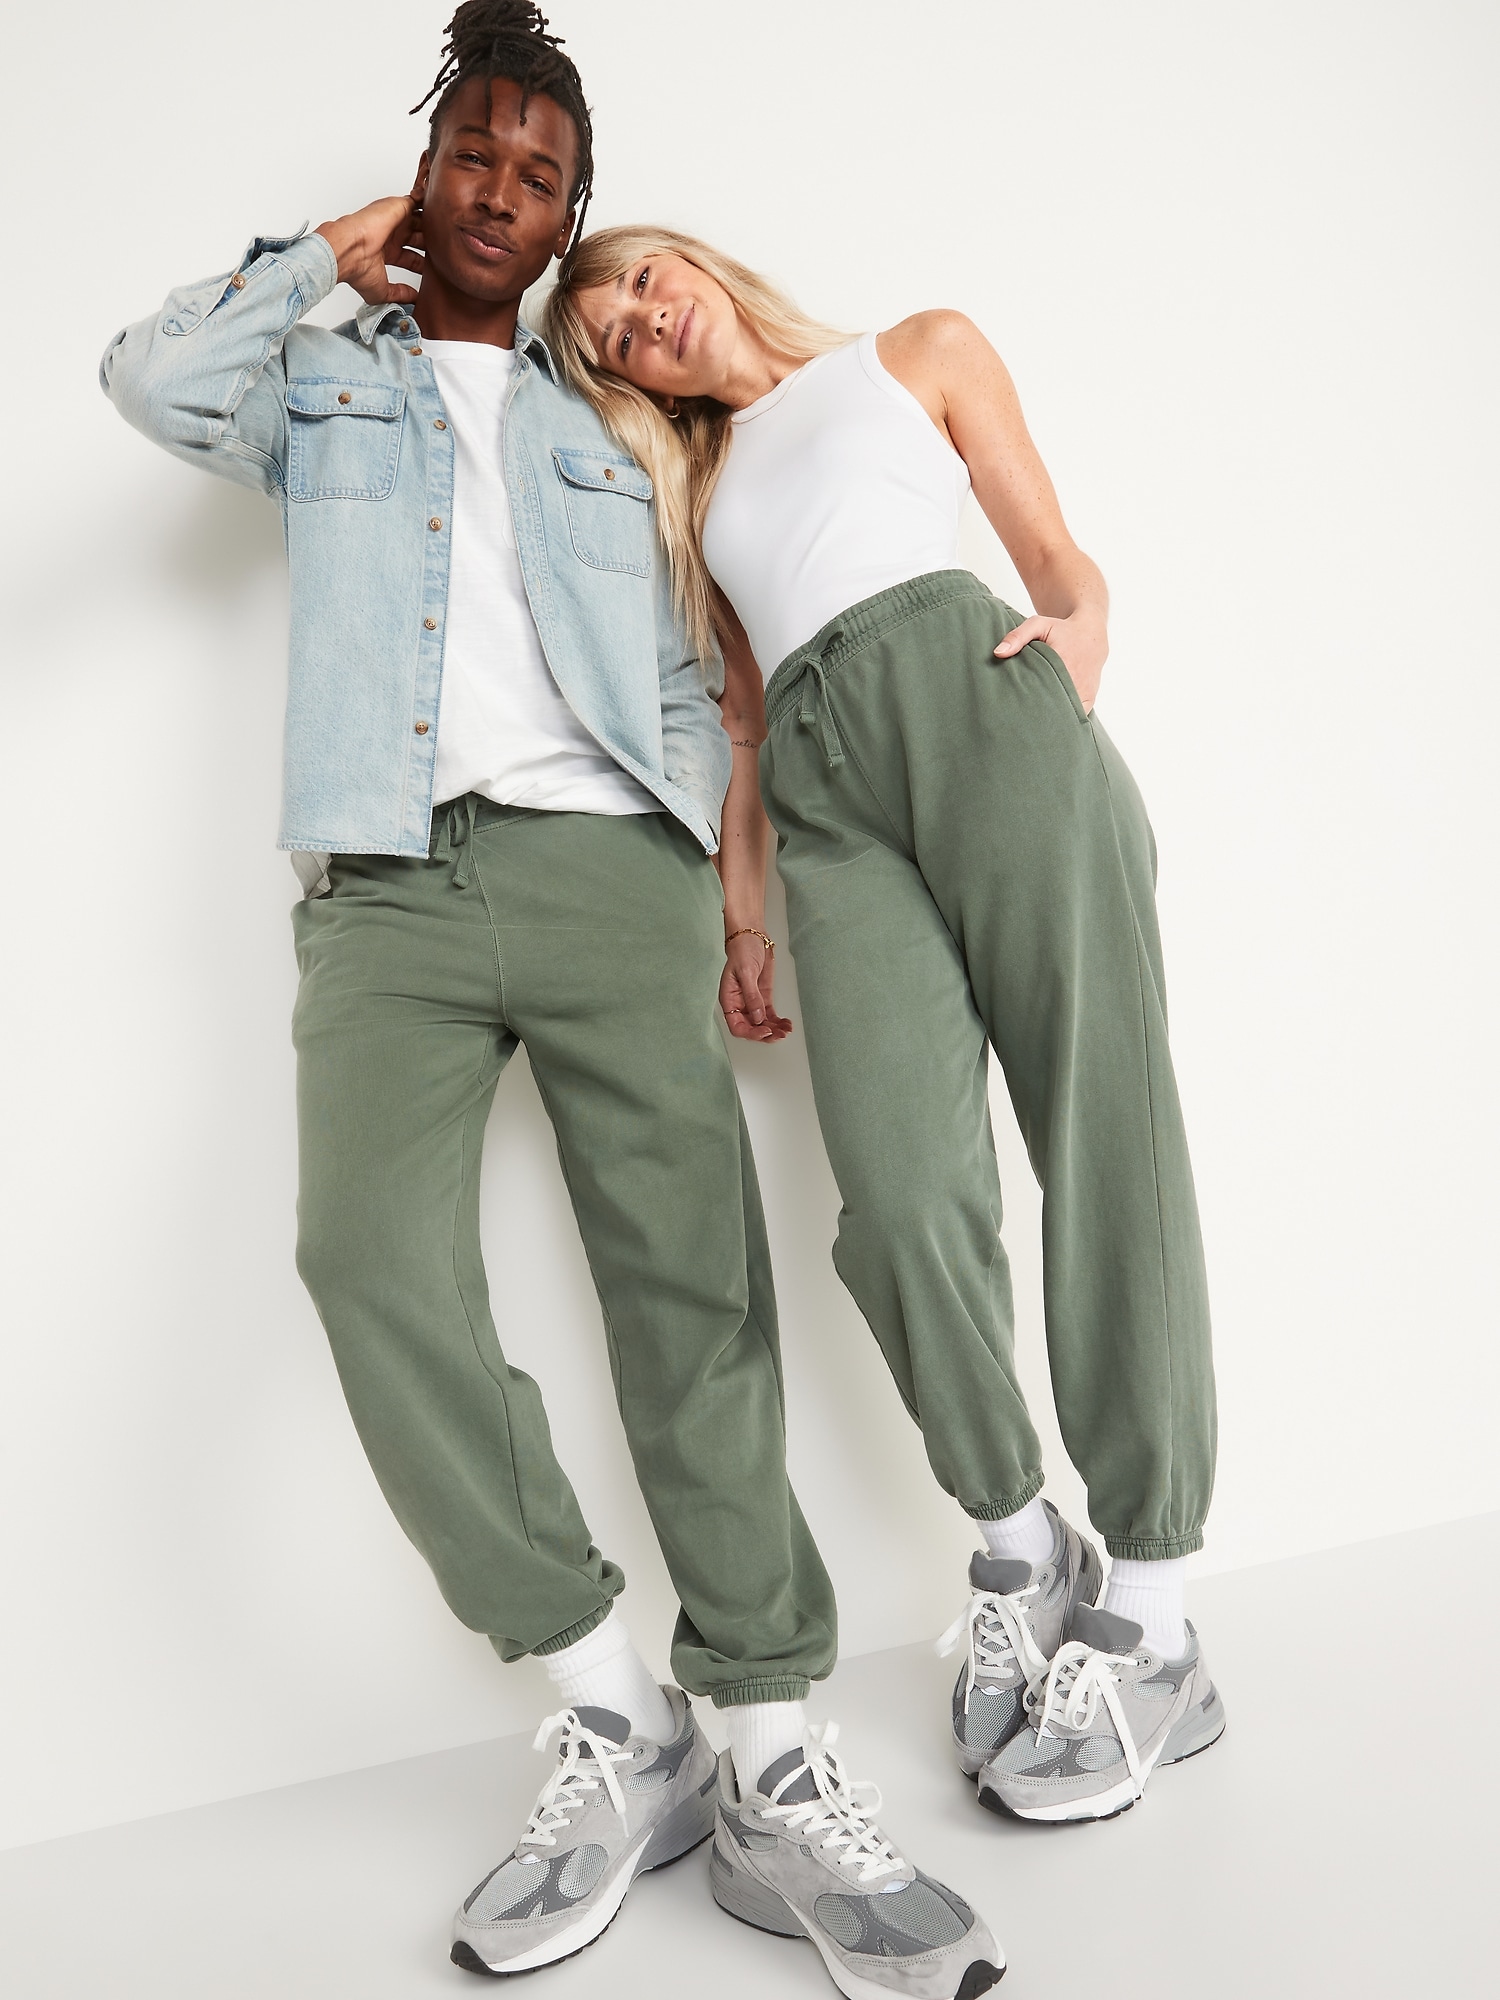 Old Navy Garment-Dyed French Terry Gender-Neutral Sweatpants for Adults